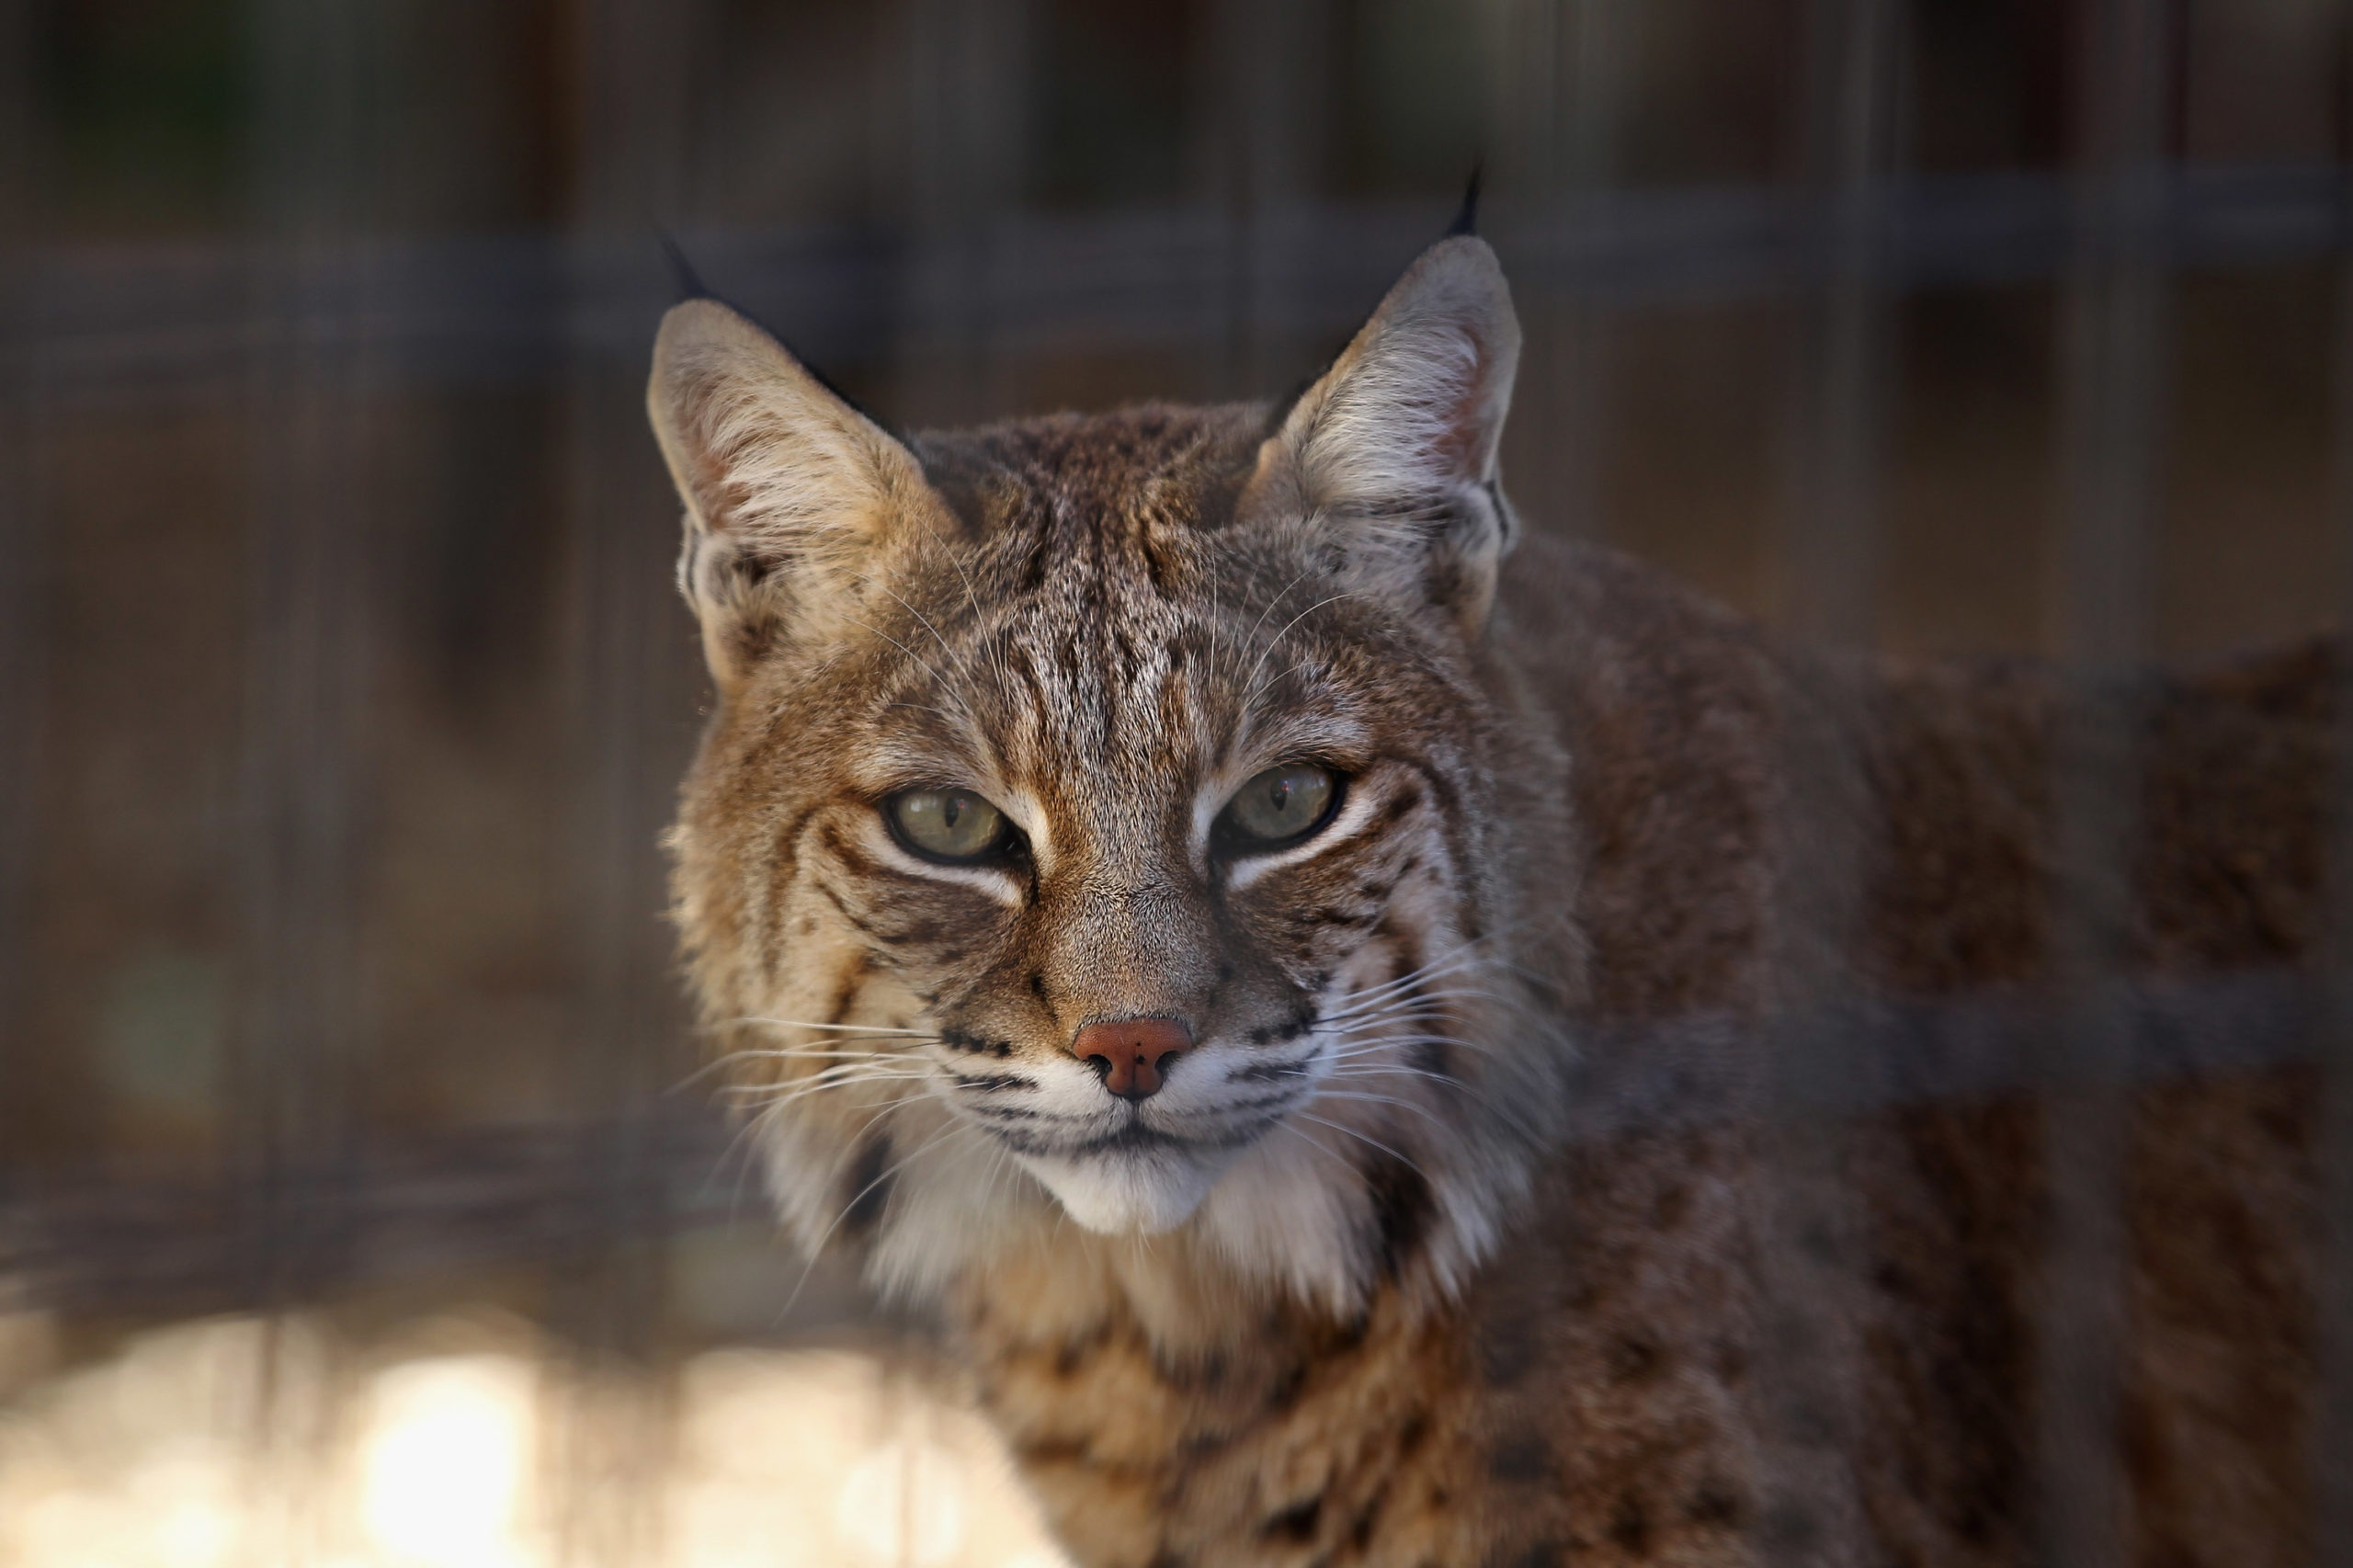 KEENESBURG, CO - OCTOBER 20: A rescued bobcat waits to be fed at The Wild Animal Sanctuary on October 20, 2011 in Keenesburg, Colorado. (Photo by John Moore/Getty Images)